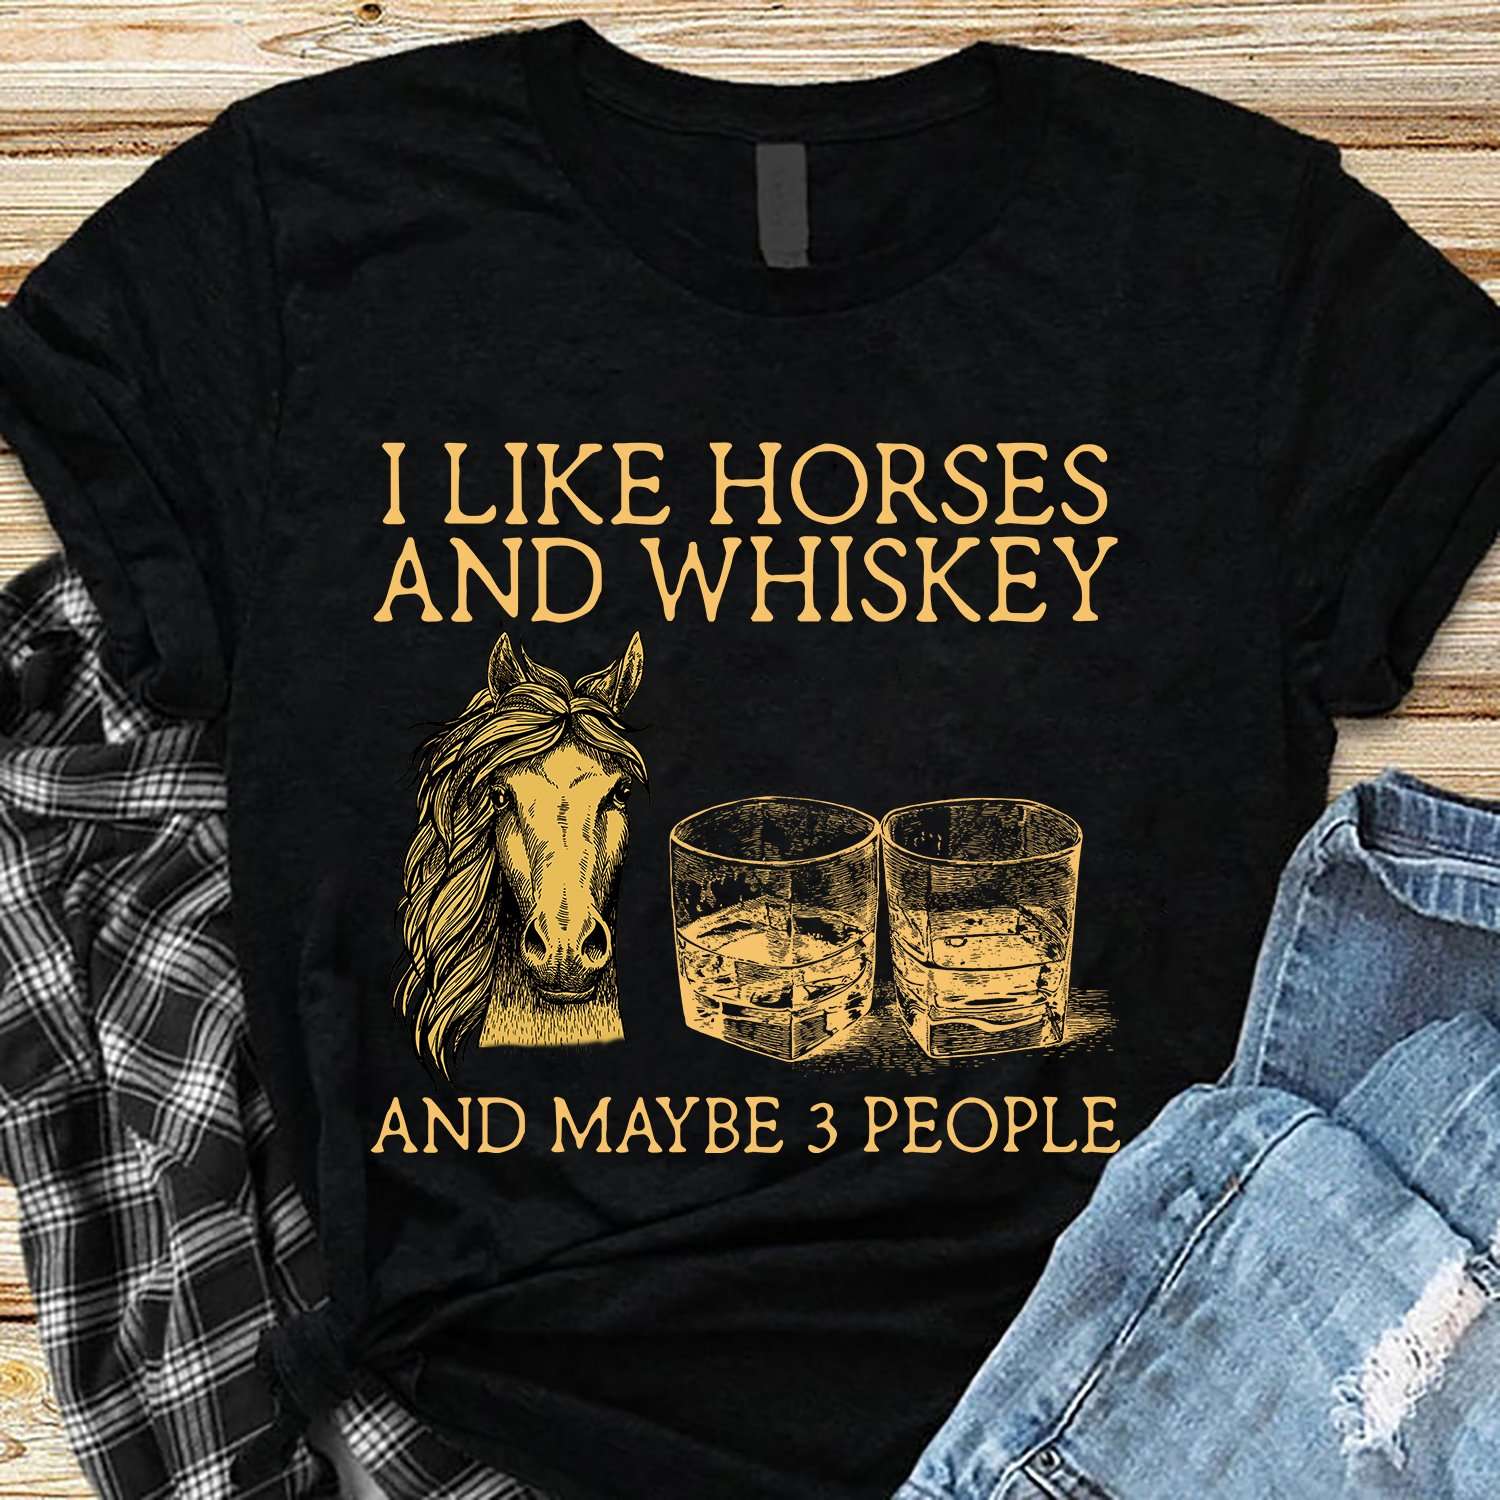 I like horses and whiskey and maybe 3 people - Whiskey wine lover